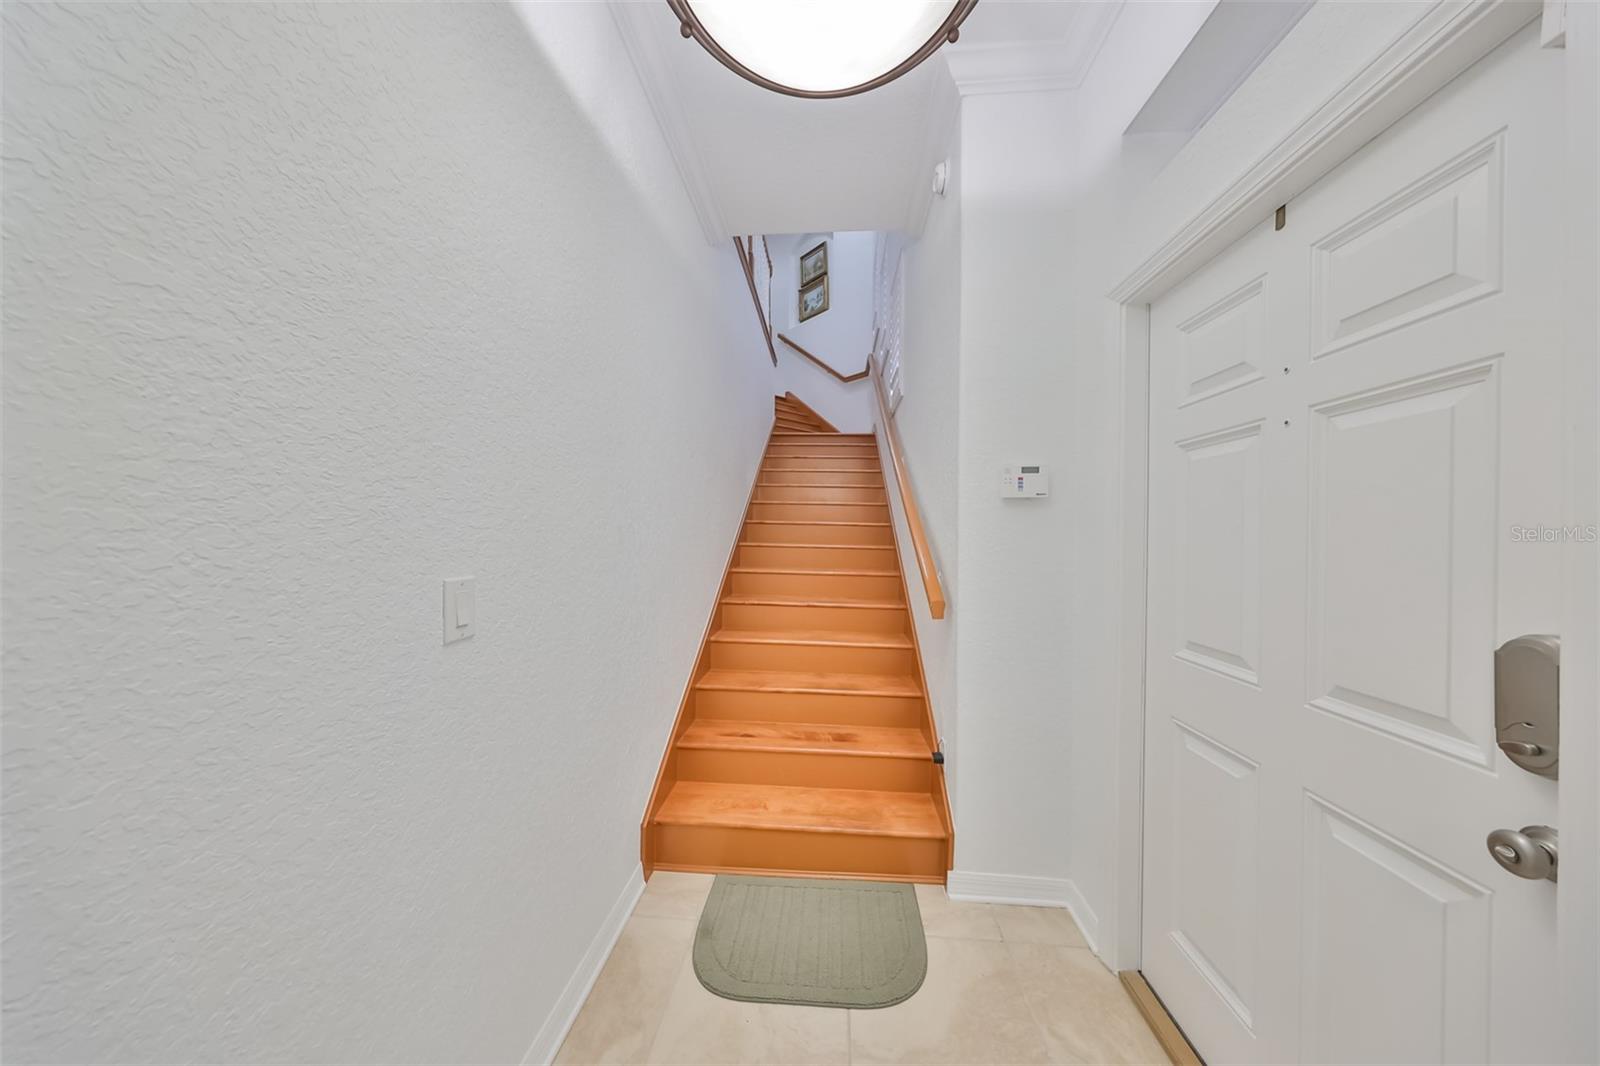 Stunning and bright entrance with all matching wood stairs and handrail lead you into this gorgeous upstairs unit. Either take the stairs or use your own private elevator!